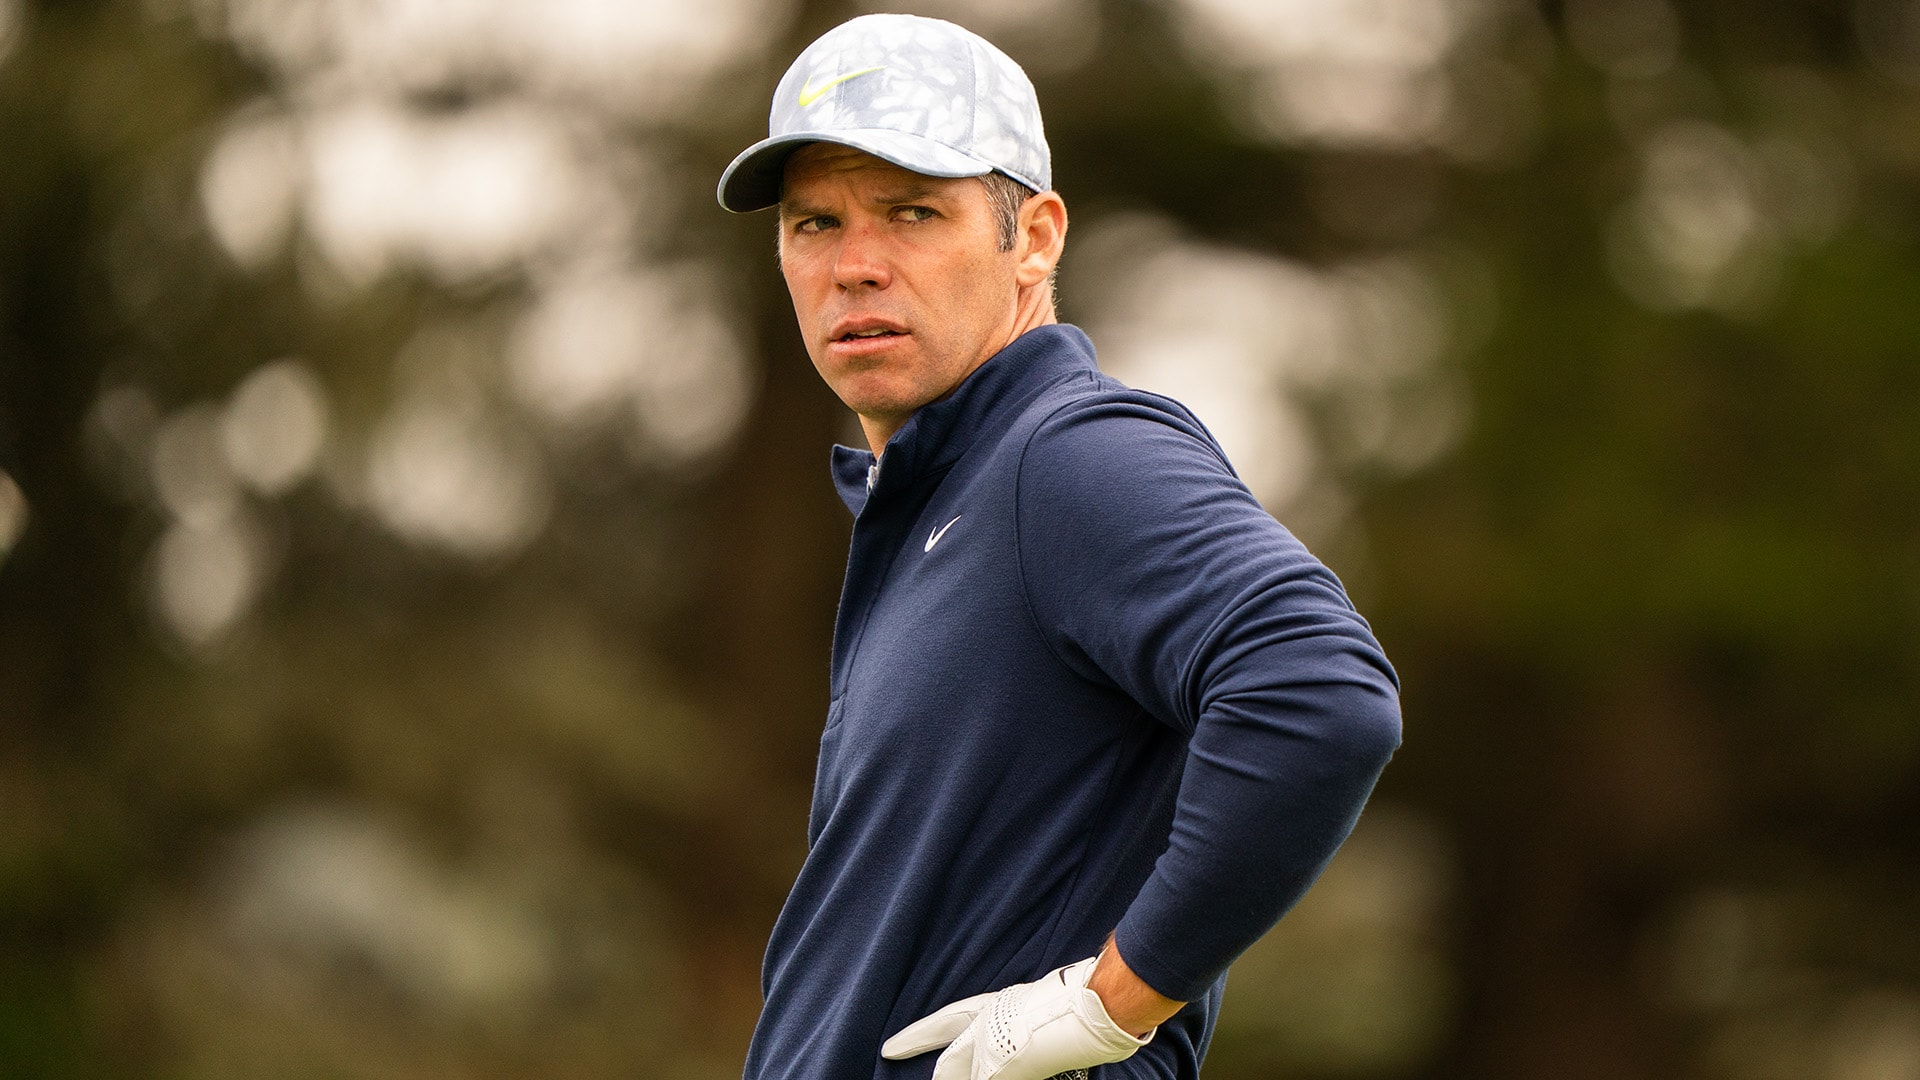 Paul Casey went 3 months without touching a club; now he’s 2 back at the PGA